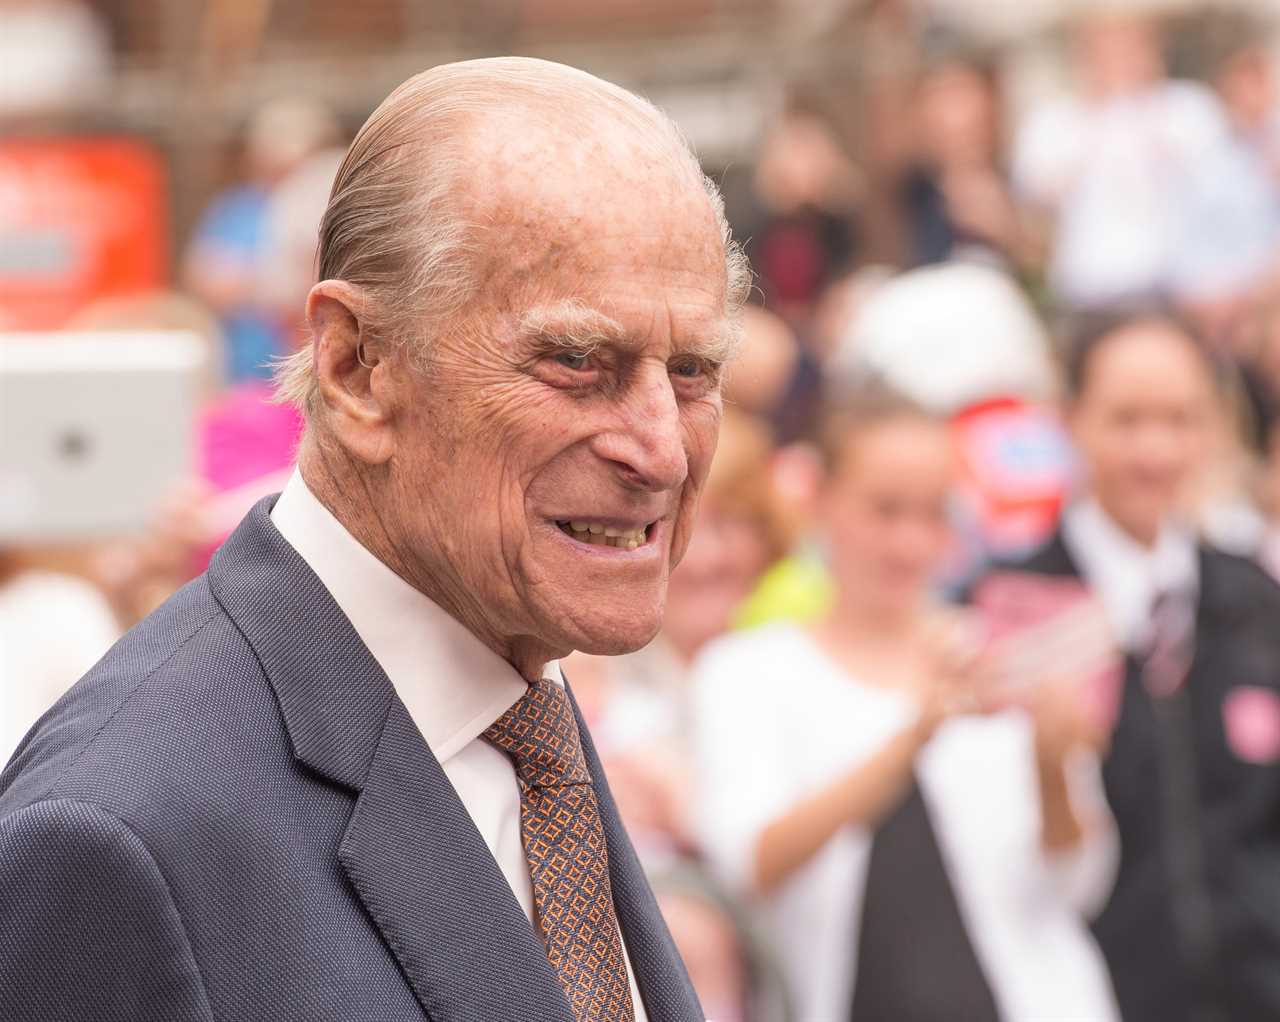 Prince Philip, 99, has been one of the most dedicated members of the Royal Family